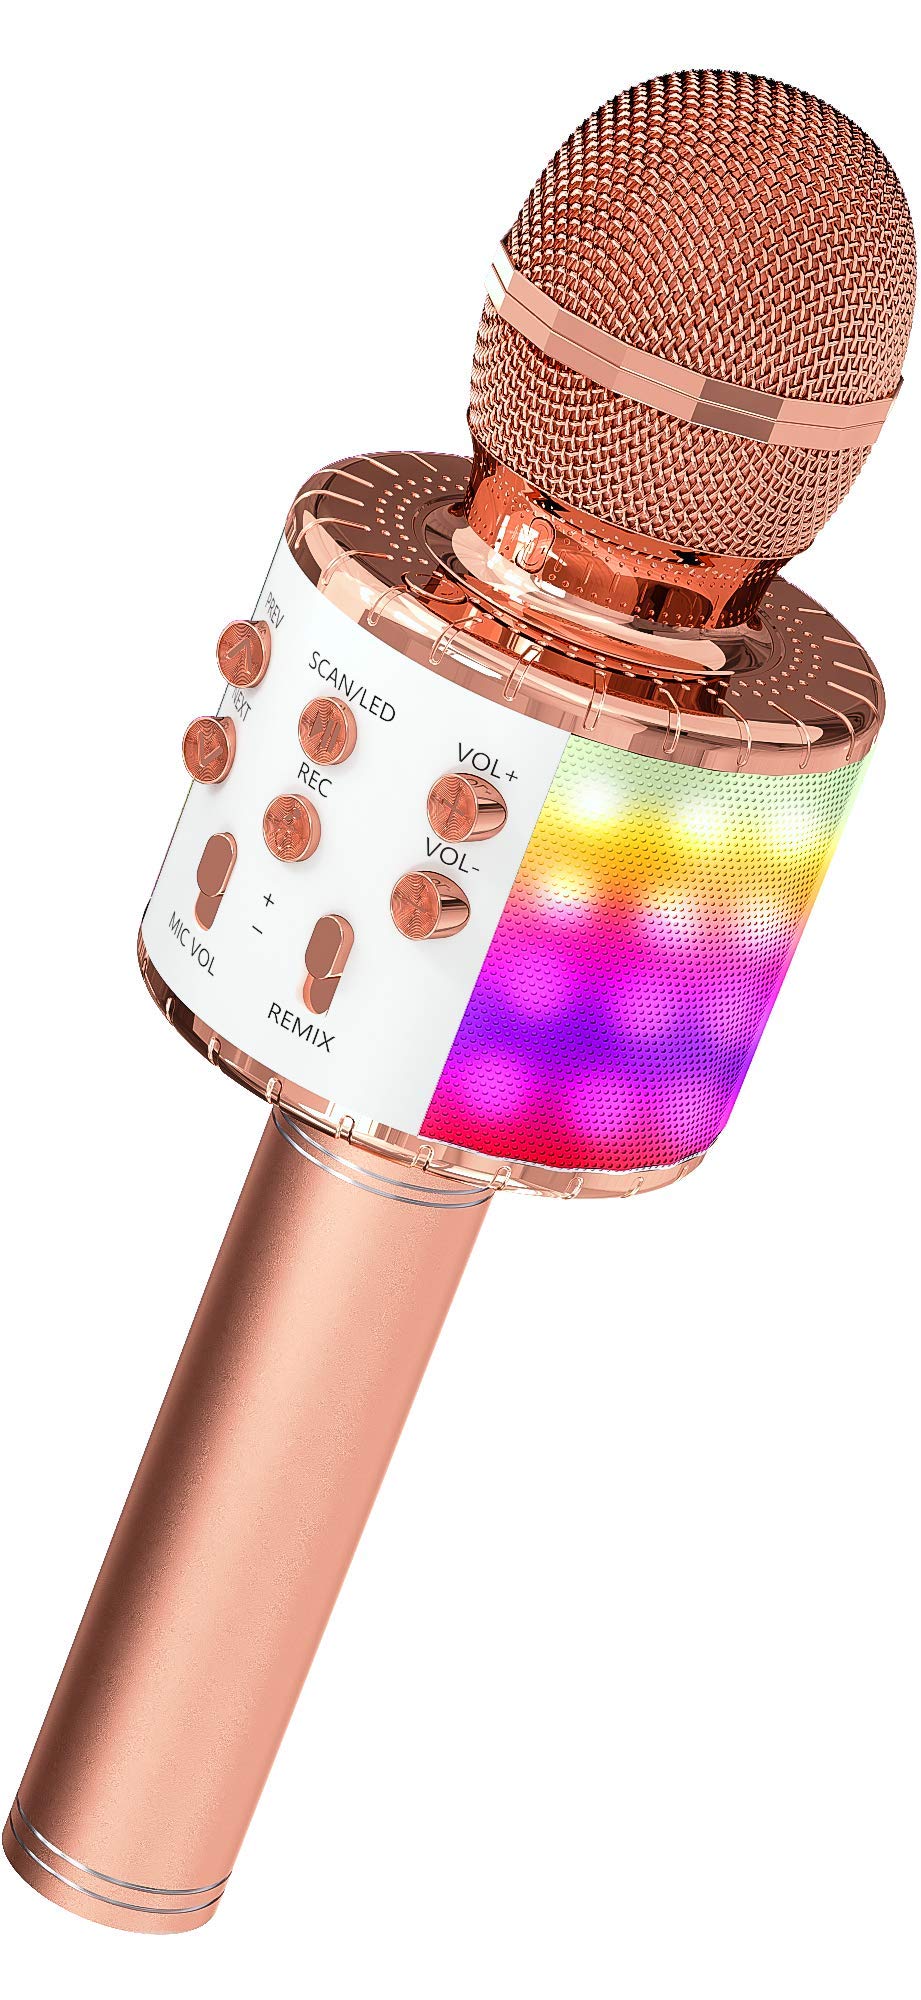 OVELLIC Karaoke Microphone for Kids, Wireless Bluetooth Karaoke Microphone with LED Lights, Portable Handheld Mic Speaker Machine, Great Gifts Toys for Girls Boys Adults All Age (Rose Gold) Rose Gold